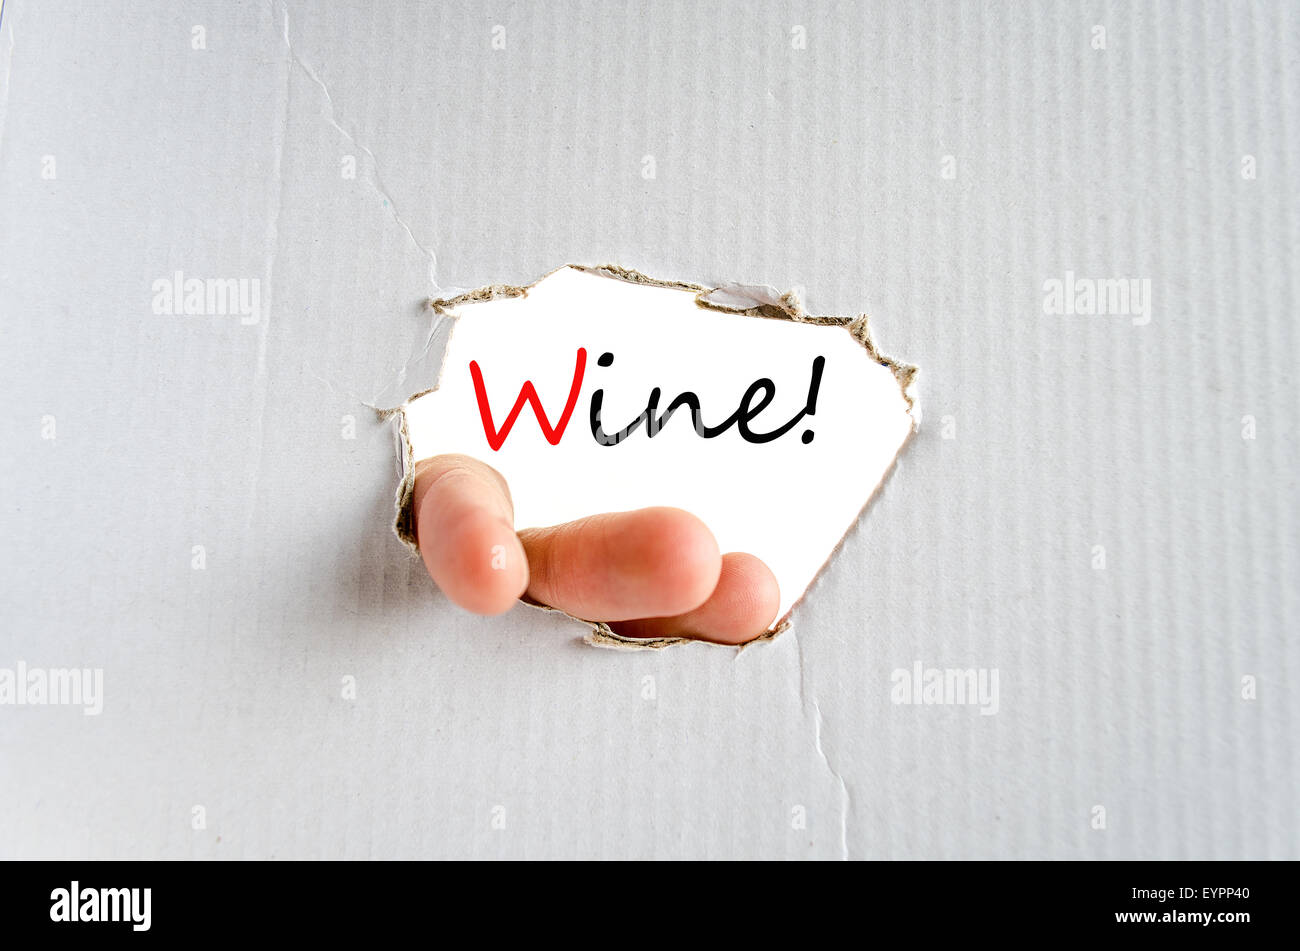 Wine text concept isolated over white background Stock Photo